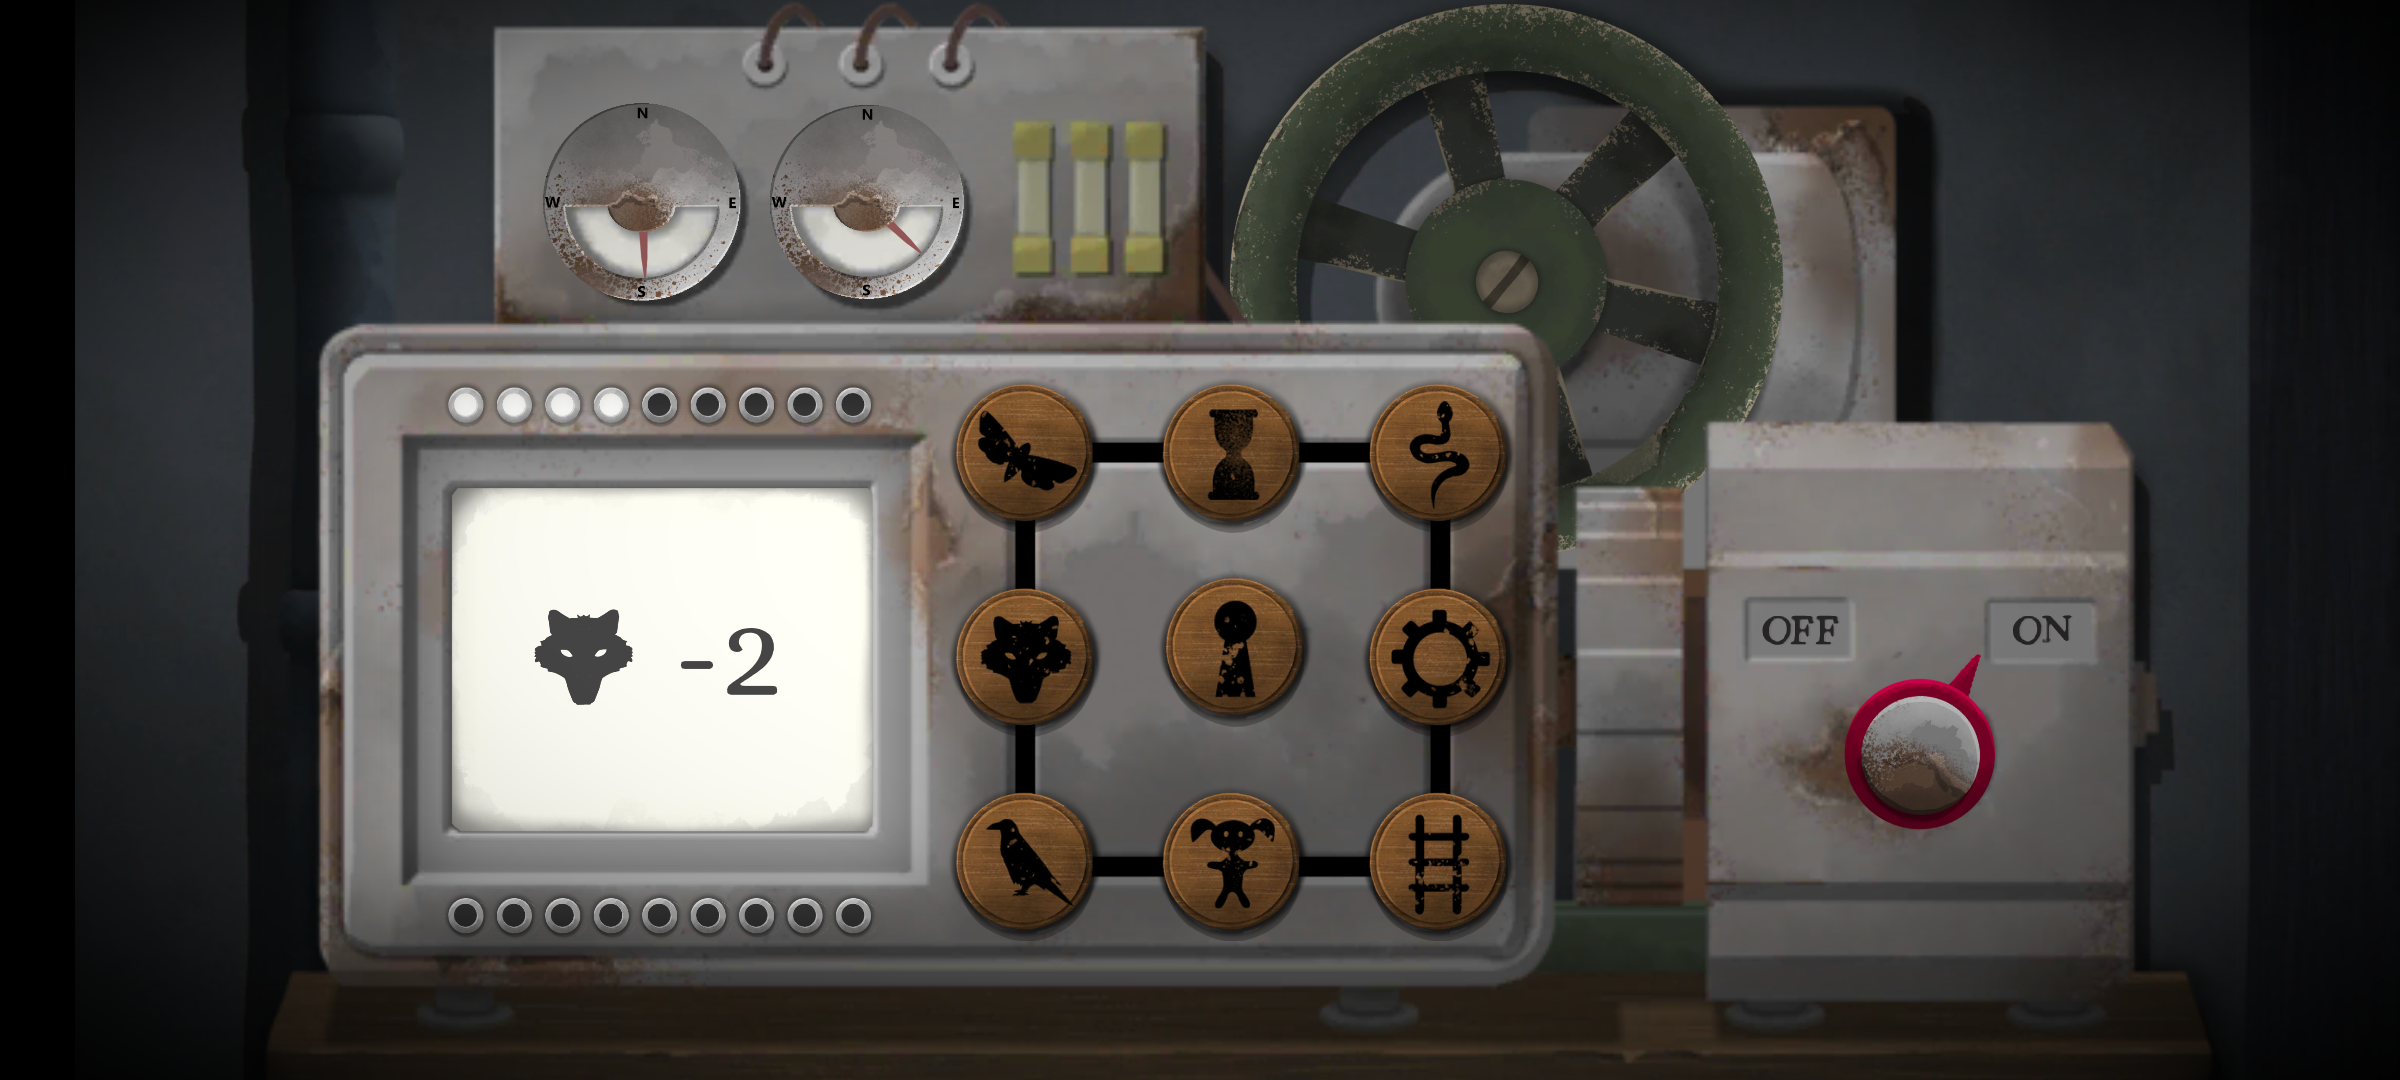 Tick Tock screenshot showing a mysterious machine with many buttons. The machine is switched on and the screen shows a wolf's head and the number "-2". The buttons show a bug, an hourglass, a snake, a wolf's head, a keyhole, a cog, a raven, a doll, and a section of railway track.